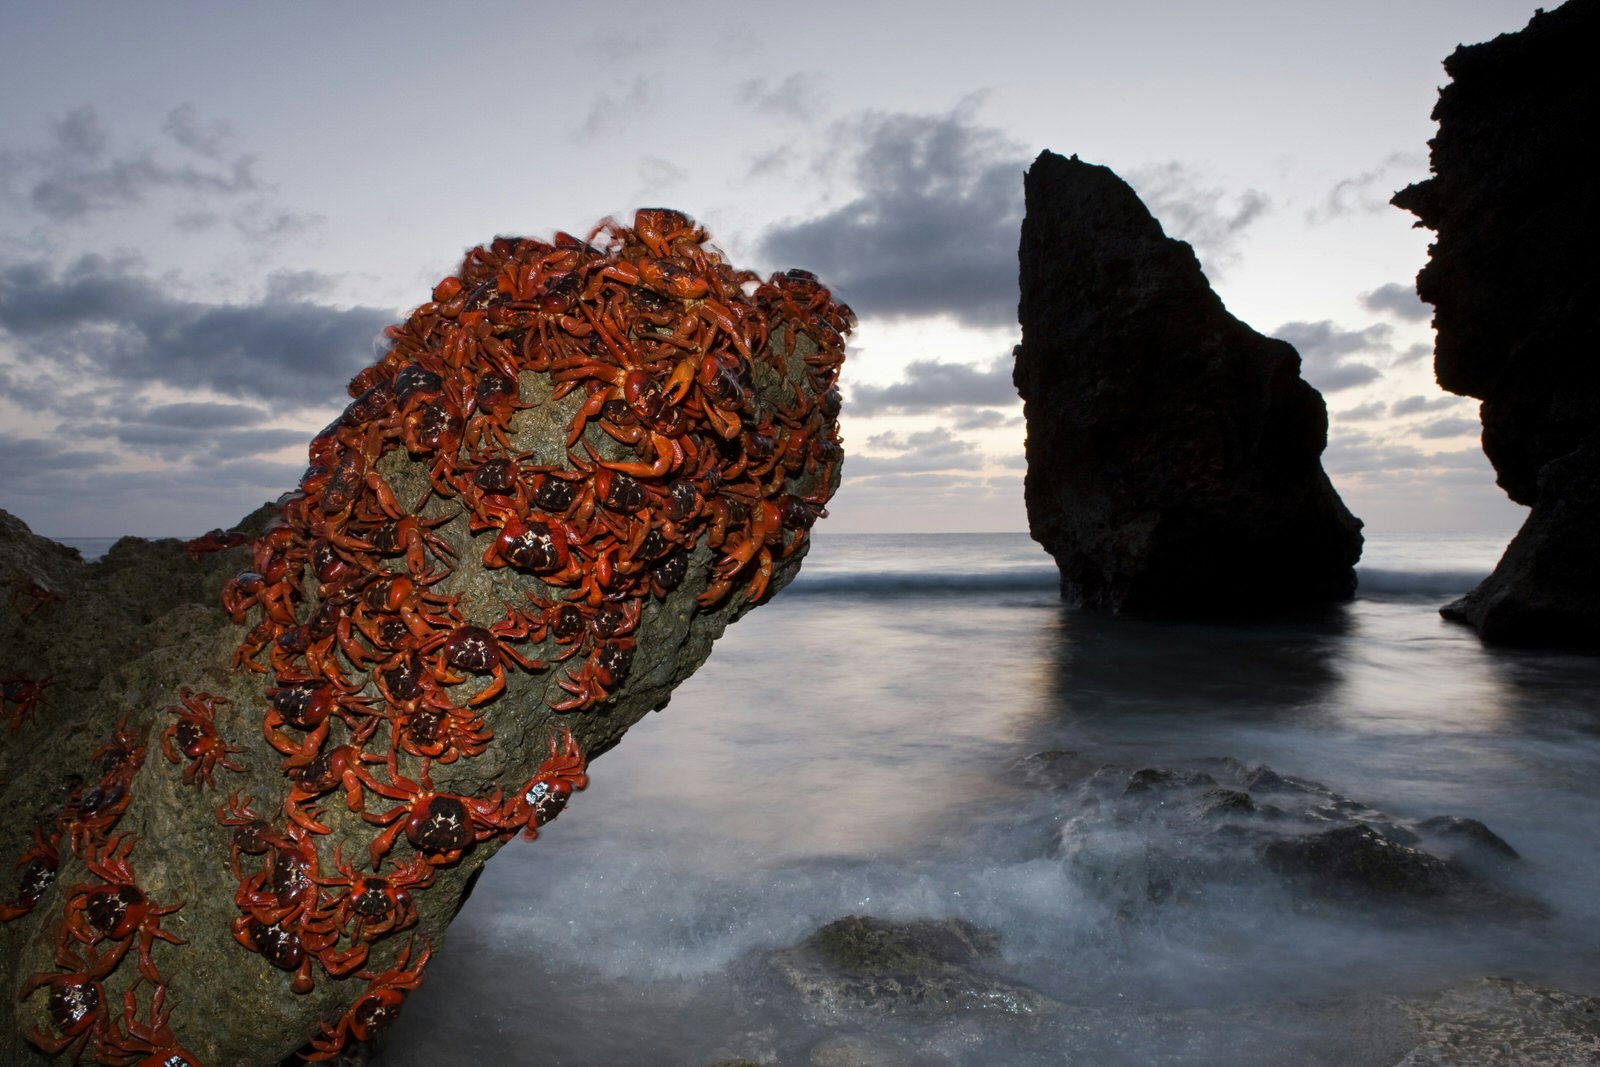 Red crabs almost completely covering a thumb-shaped rock sticking out over the water; two large outcrops - silhouetted in the fading light - tower over the ocean in the background crawling over the rocky seashore of Christmas Island